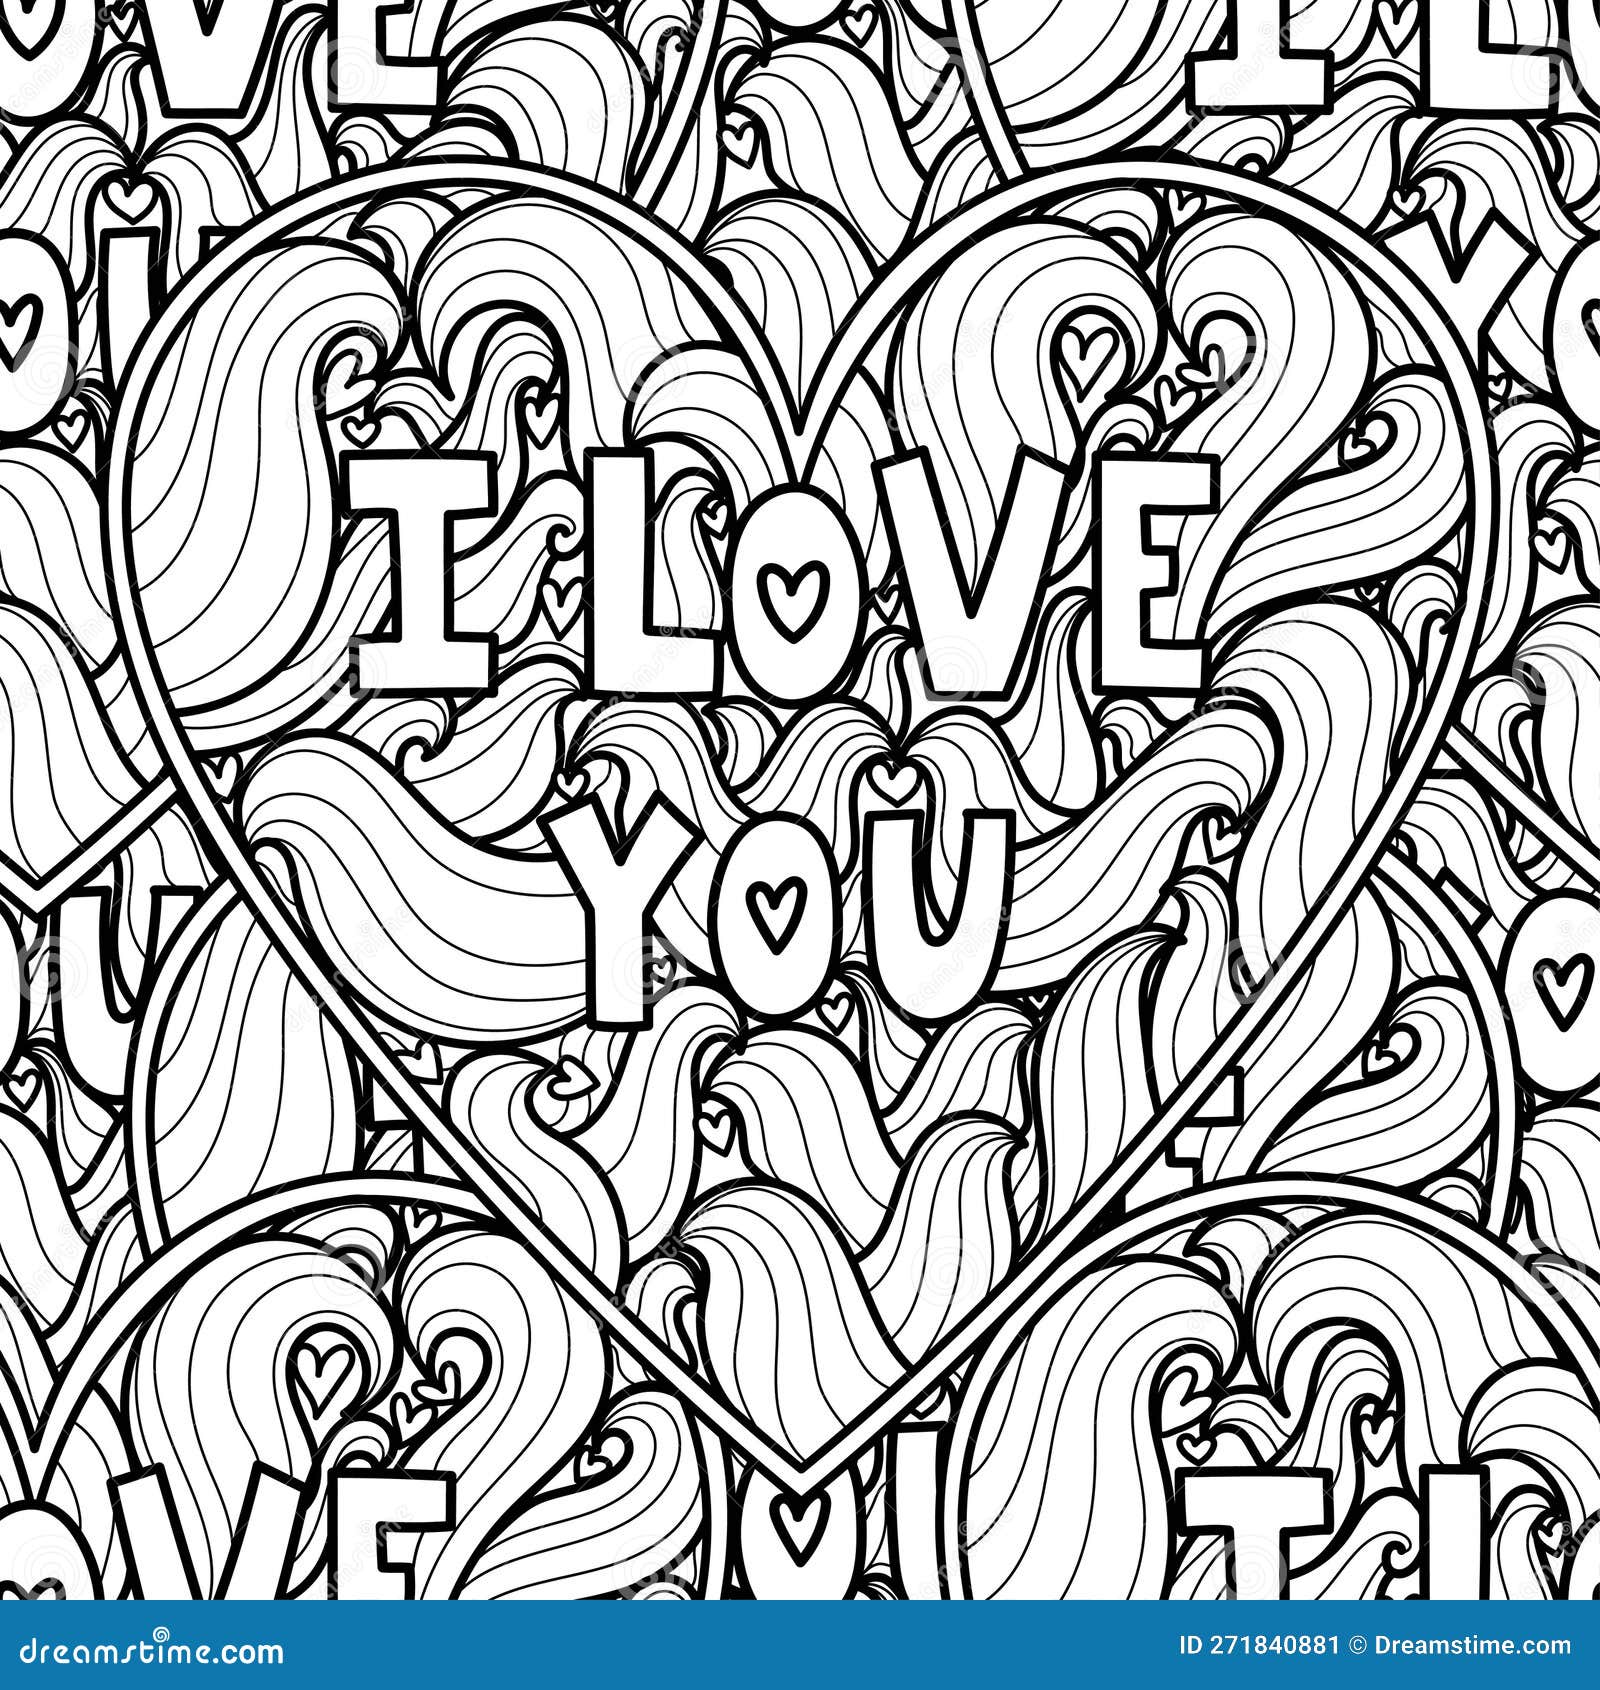 Coloring books adults Vectors & Illustrations for Free Download